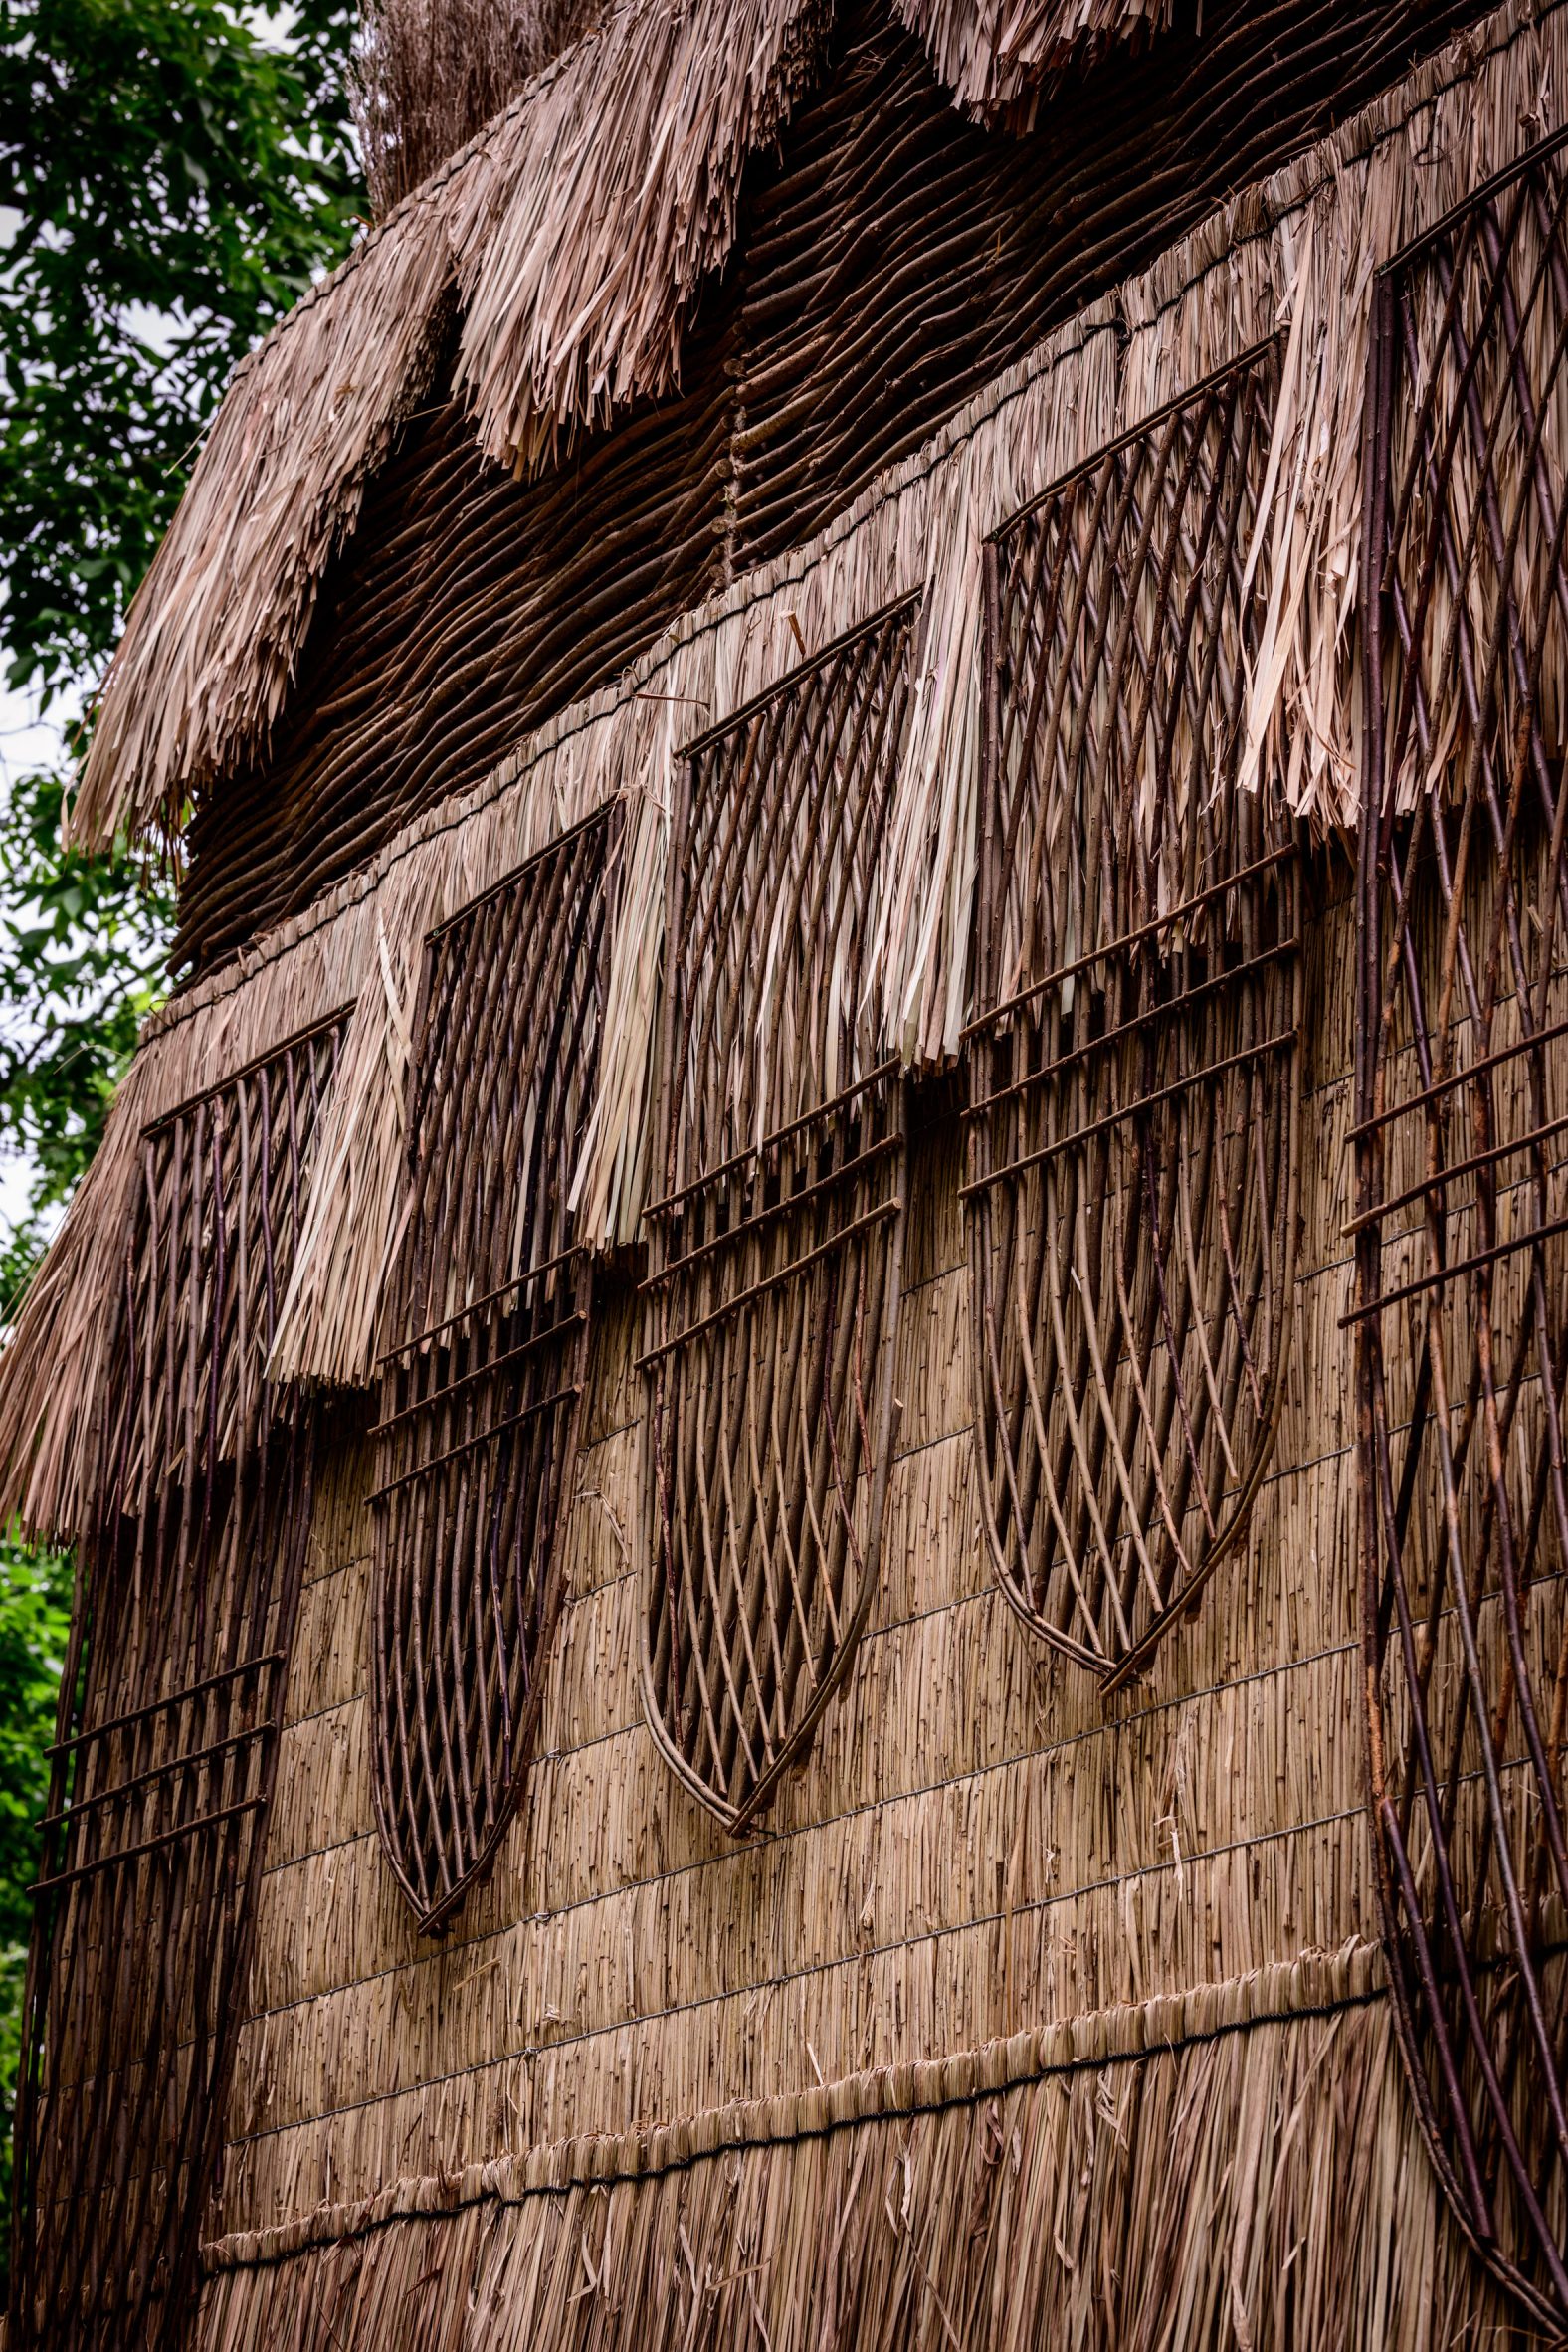 Wrapped in Enset Leaves, Ethiopia Cultural Inspiration through the False Banana Pavilion